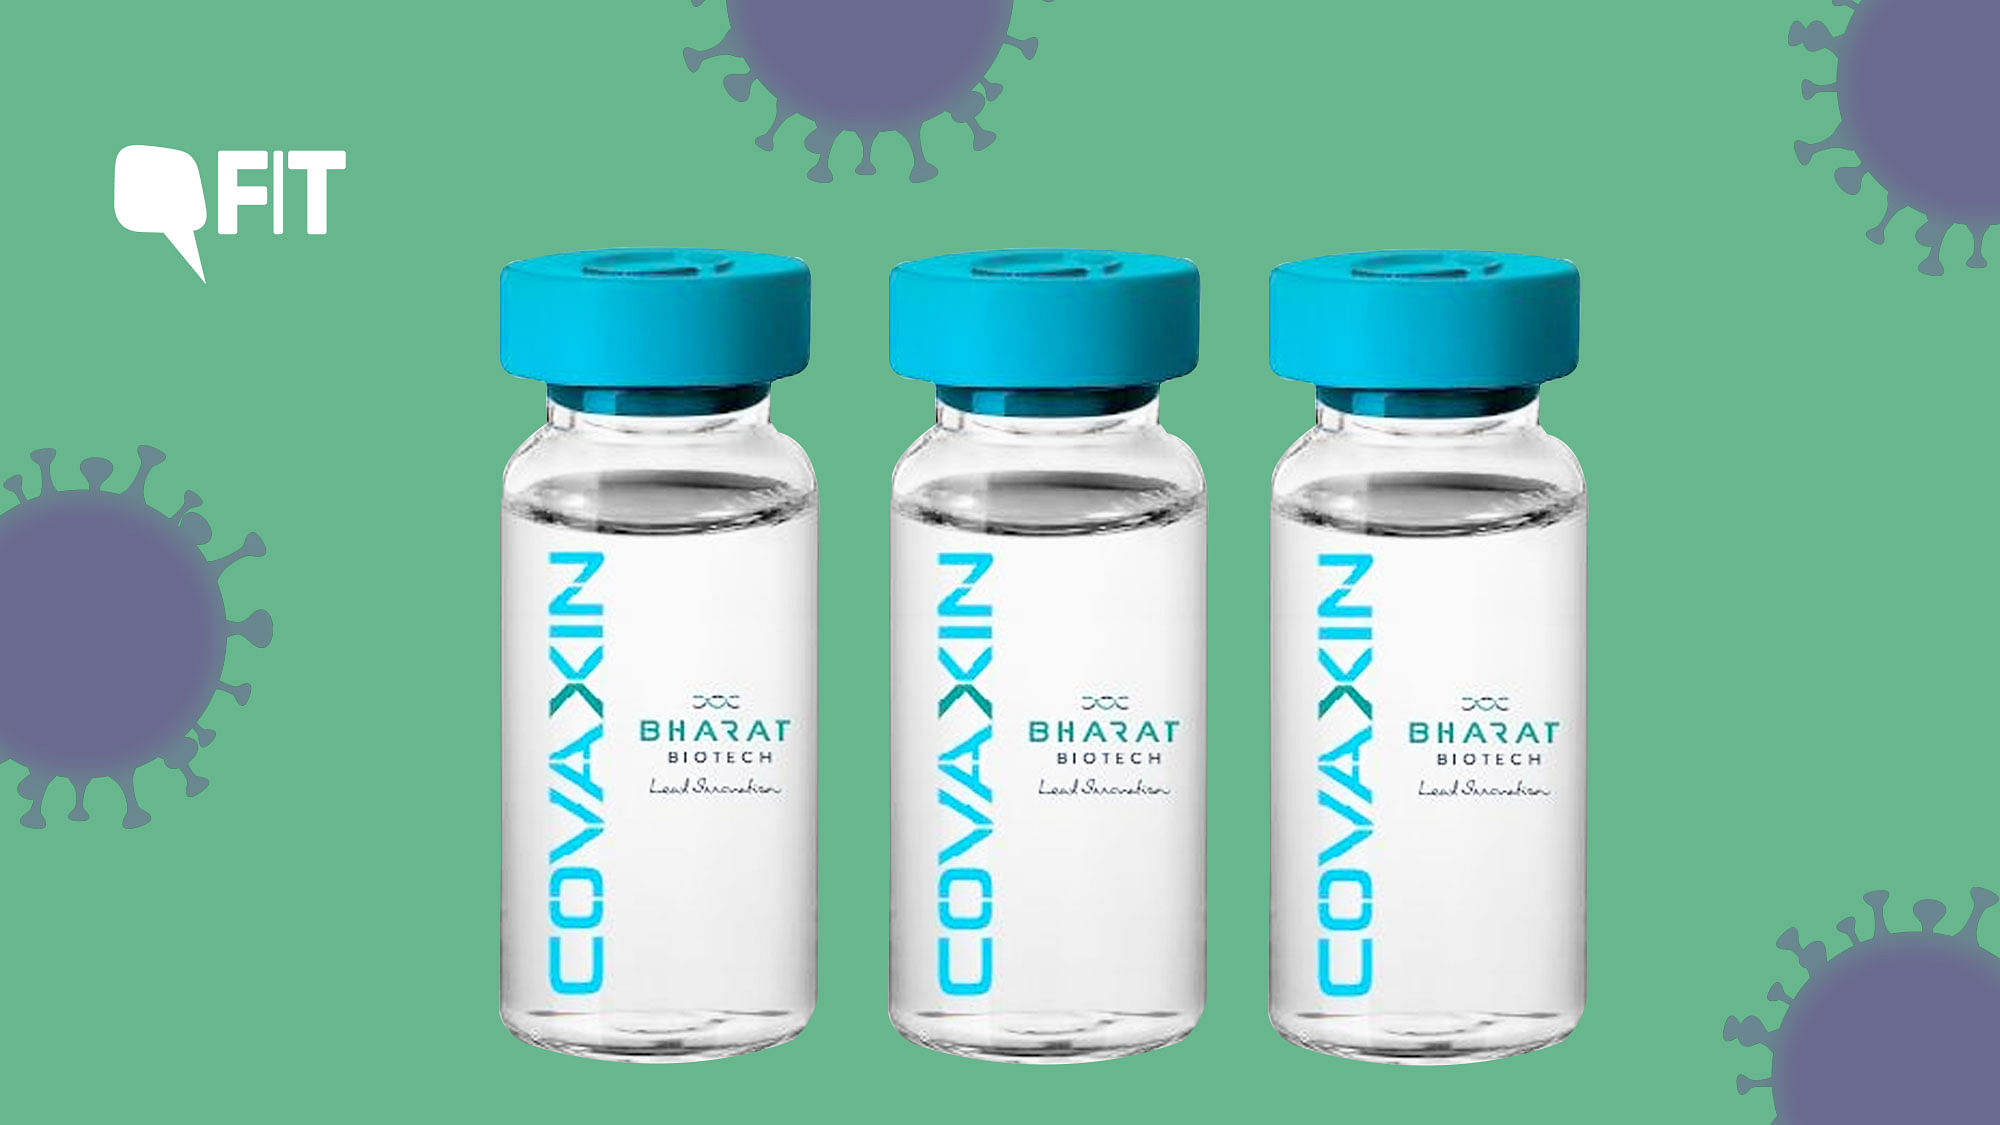 Bharat Biotech makes Covaxin by inactivating the SARS-COV-2 virus, so that virus does not make people sick even as its antigens – the proteins on the surface of the virus - provoke an immune response.&nbsp;